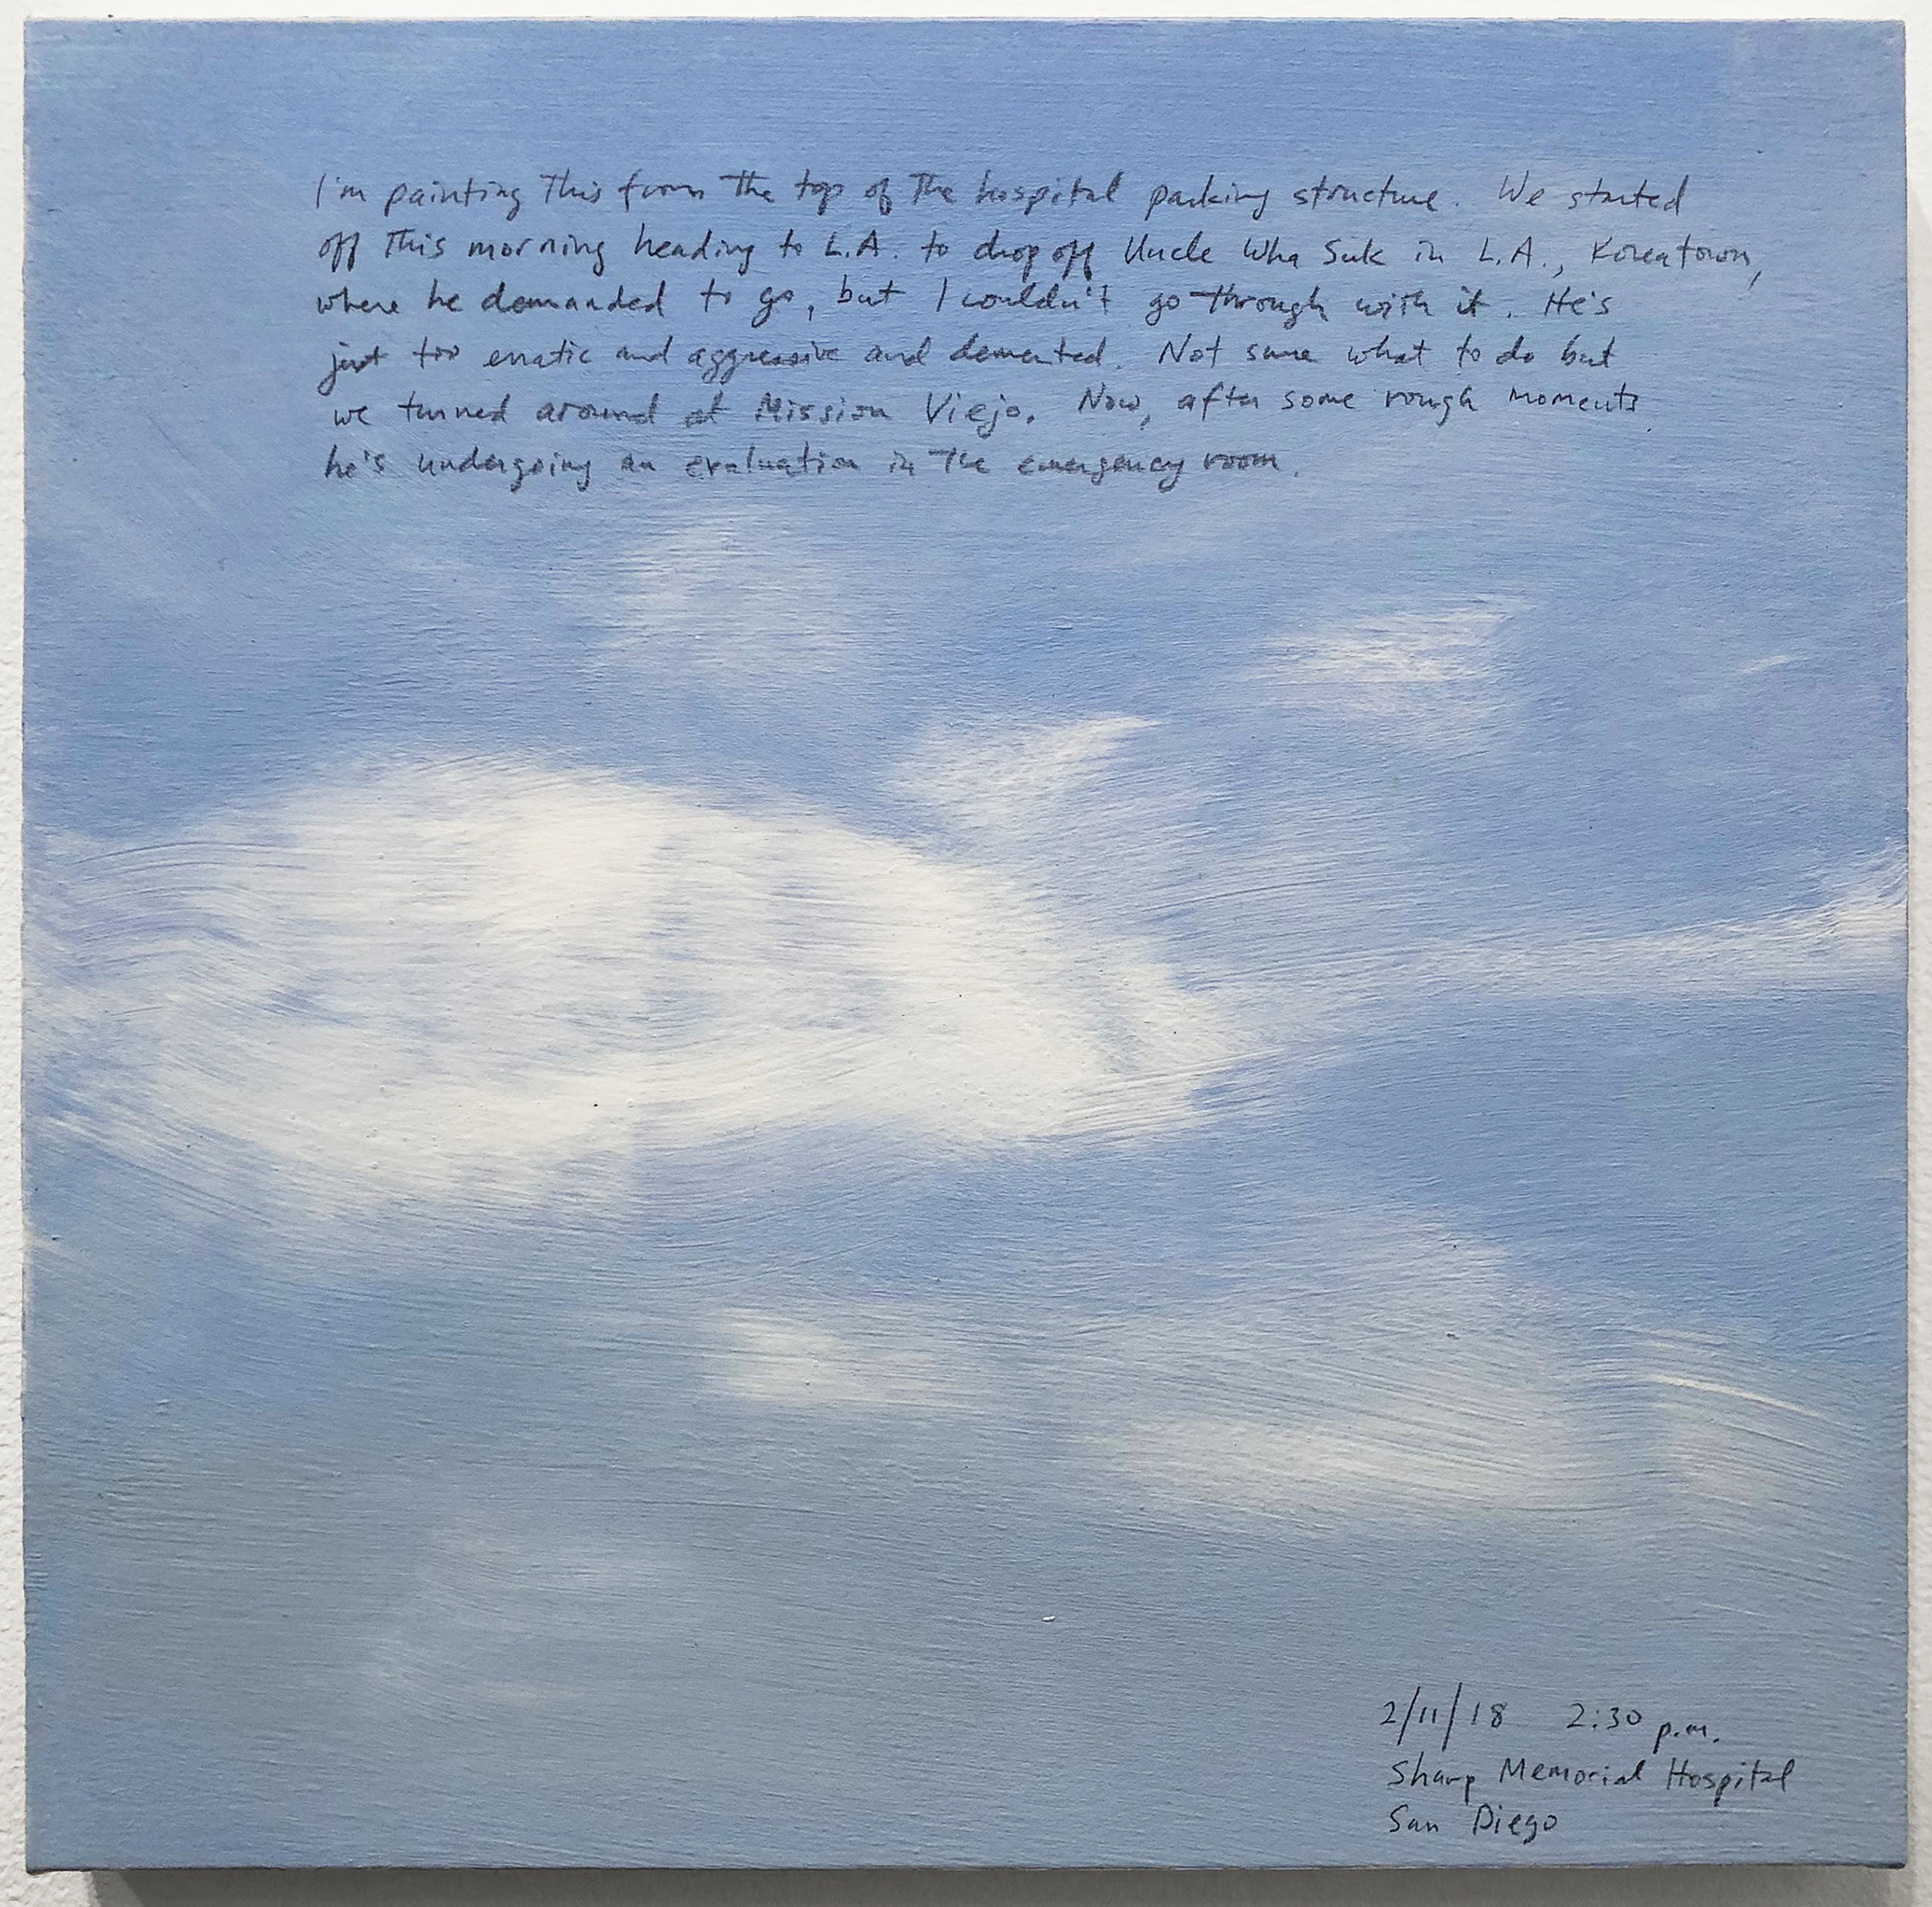 A 14 × 14 inch, acrylic painting of the sky. A journal entry is handwritten on the painting:

“I’m painting this from the top of the hospital parking structure. We started off this morning heading to L.A. to drop off Uncle Wha Suk in L.A., Koreatown, where he demanded to go, but I couldn’t go through with it. He’s just too erratic and aggressive and demented. Not sure what to do but we turned around at Mission Viejo. Now, after some rough moments he’s undergoing an evaluation in the emergency room.

2/11/18 2:30 p.m.
Sharp Memorial Hospital
San Diego”